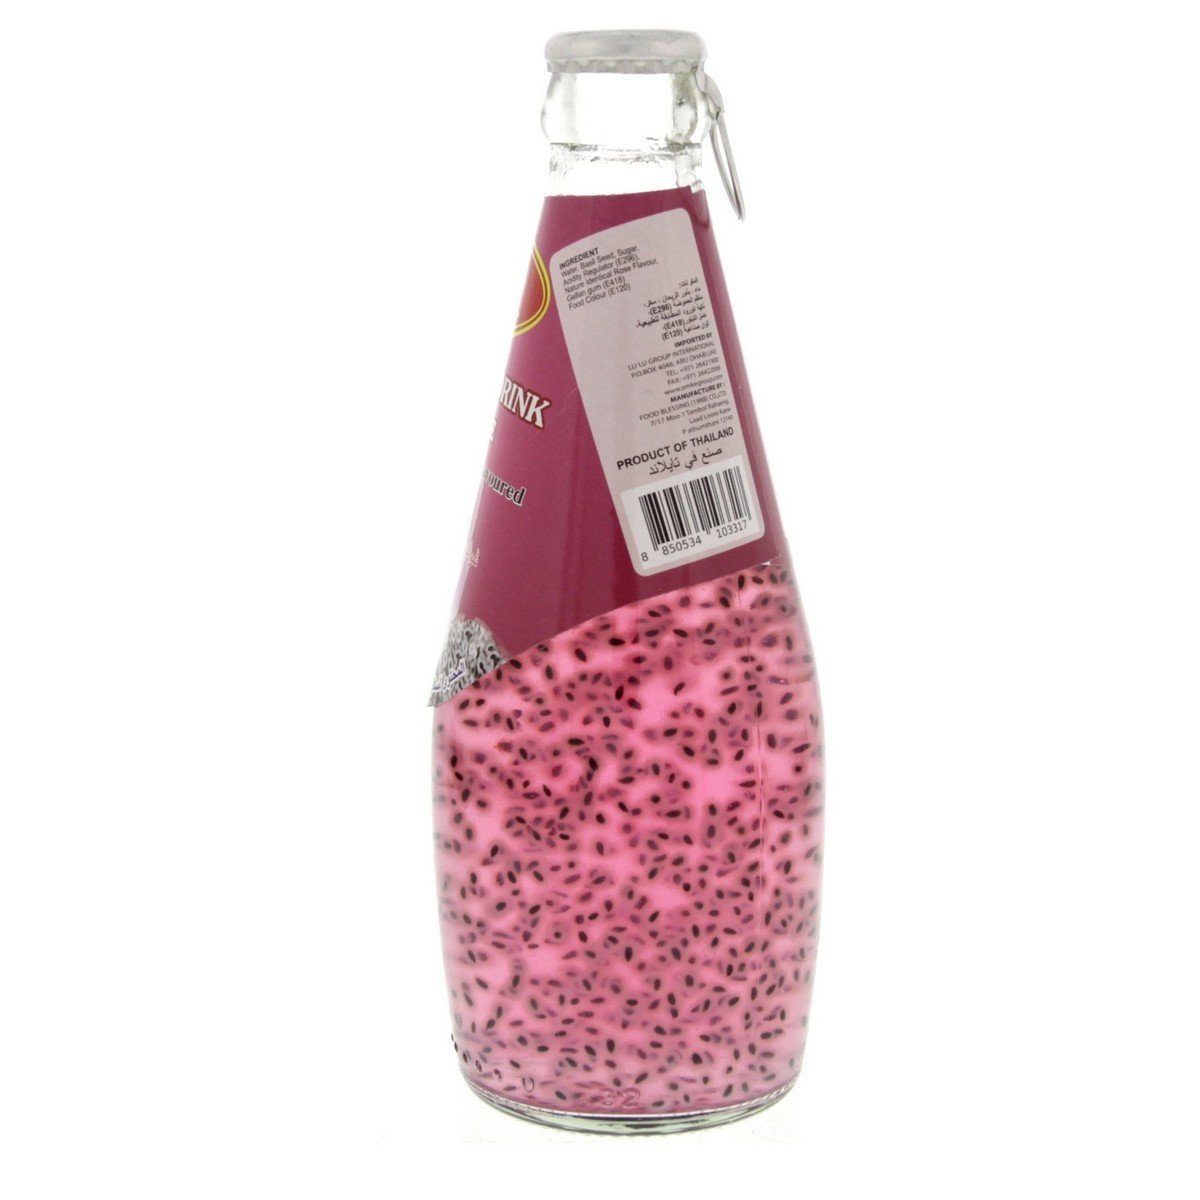 LuLu Fresh Basil Seed Drink With Rose Flavoured 290 ml